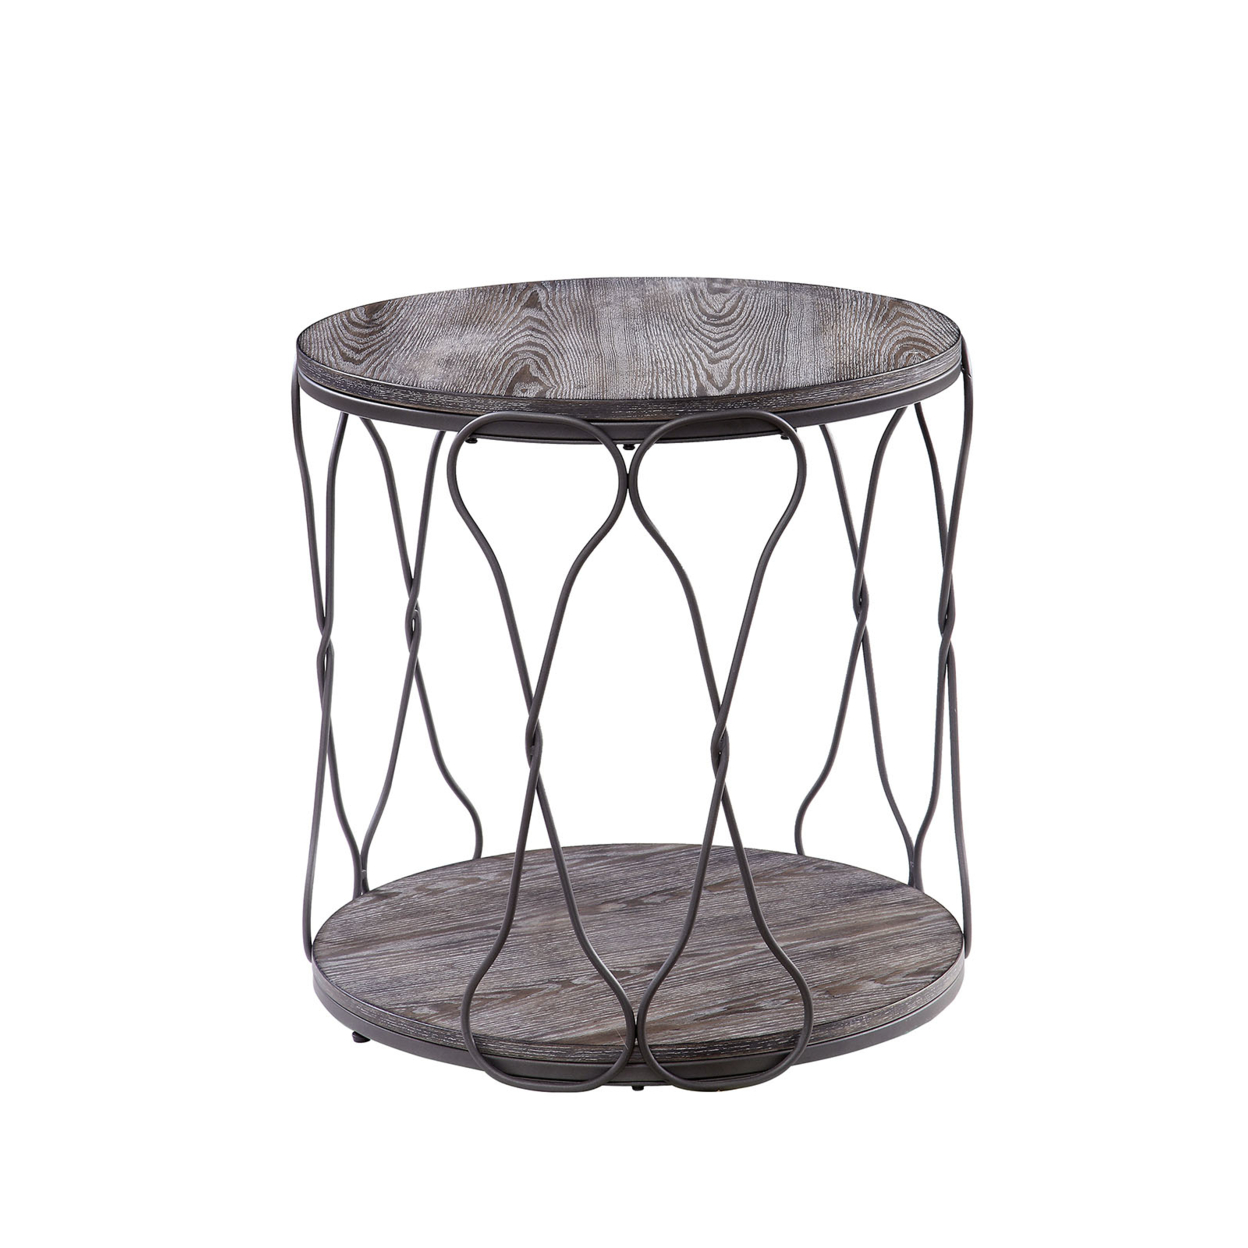 Round Industrial Style Metal And Solid Wood End Table With Open Bottom Shelf, Gray And Brown- Saltoro Sherpi